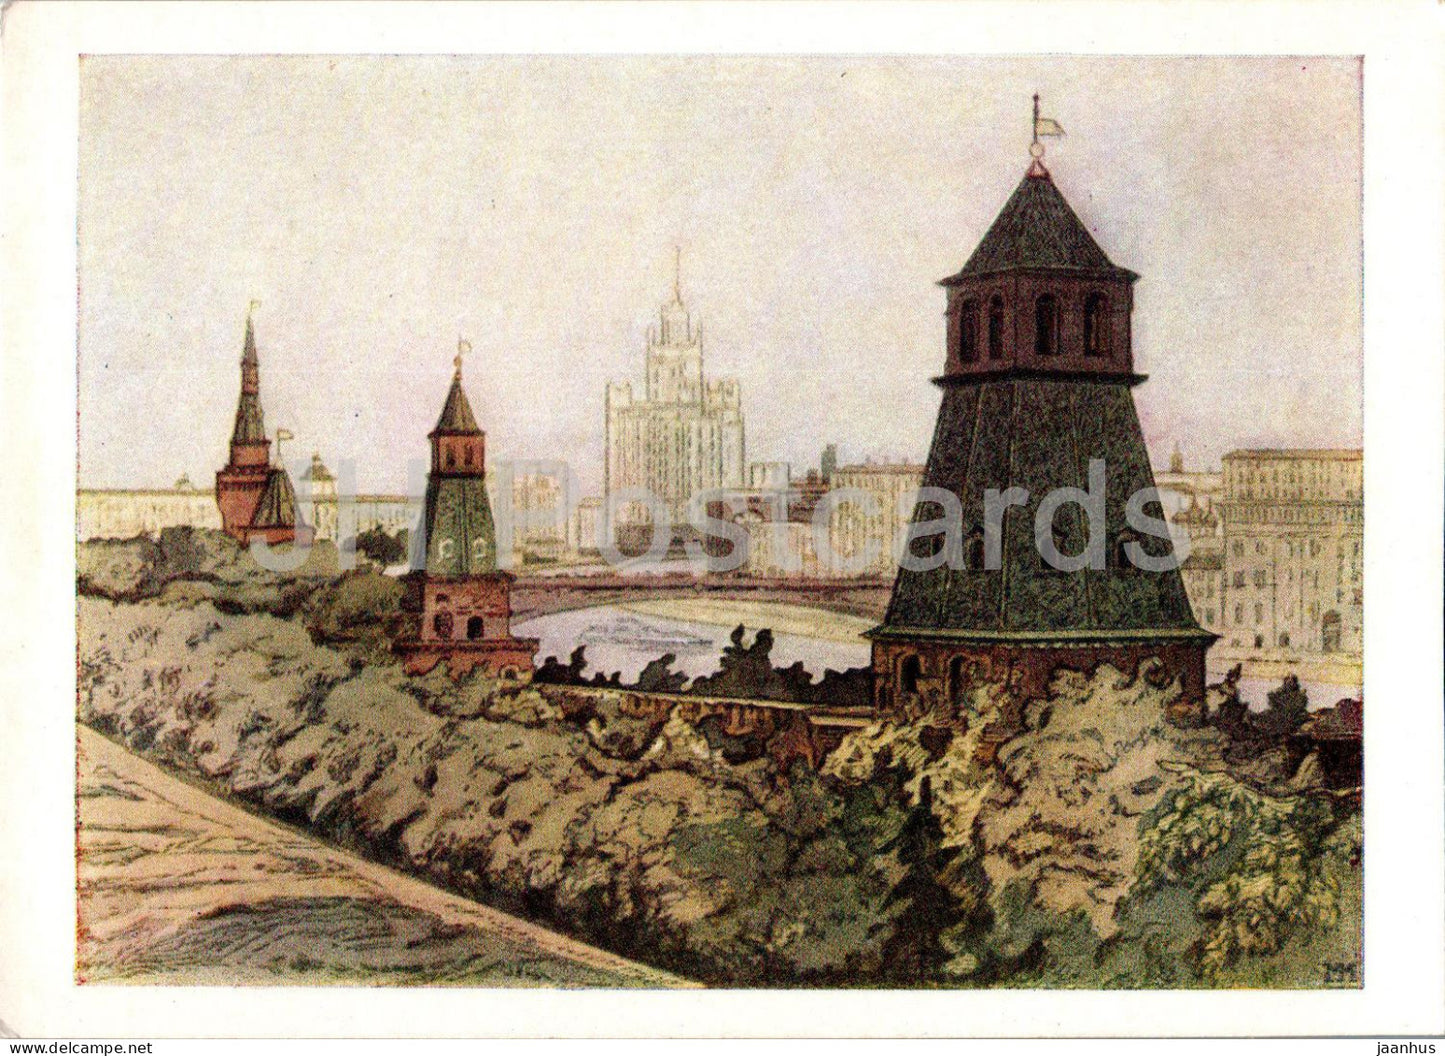 Moscow Kremlin - View from Kremlin to the Moscow - illustration by M. Matorin - 1962 - Russia USSR - unused - JH Postcards